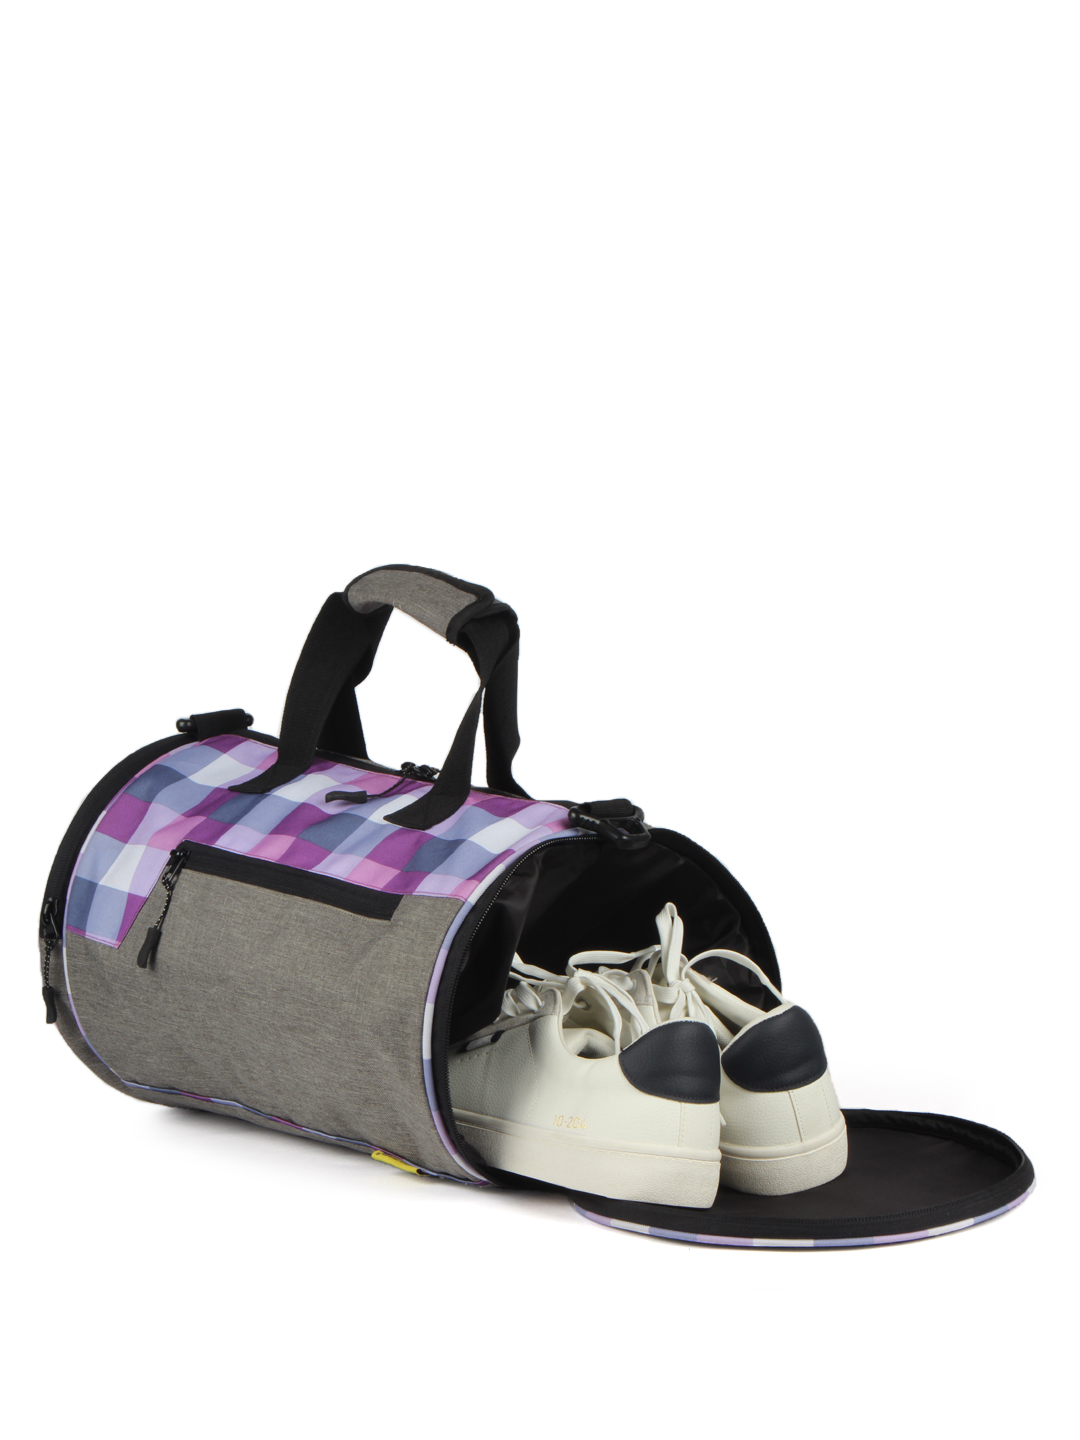 Orka Travel Gym Bag With Shoe Compartment Aries  